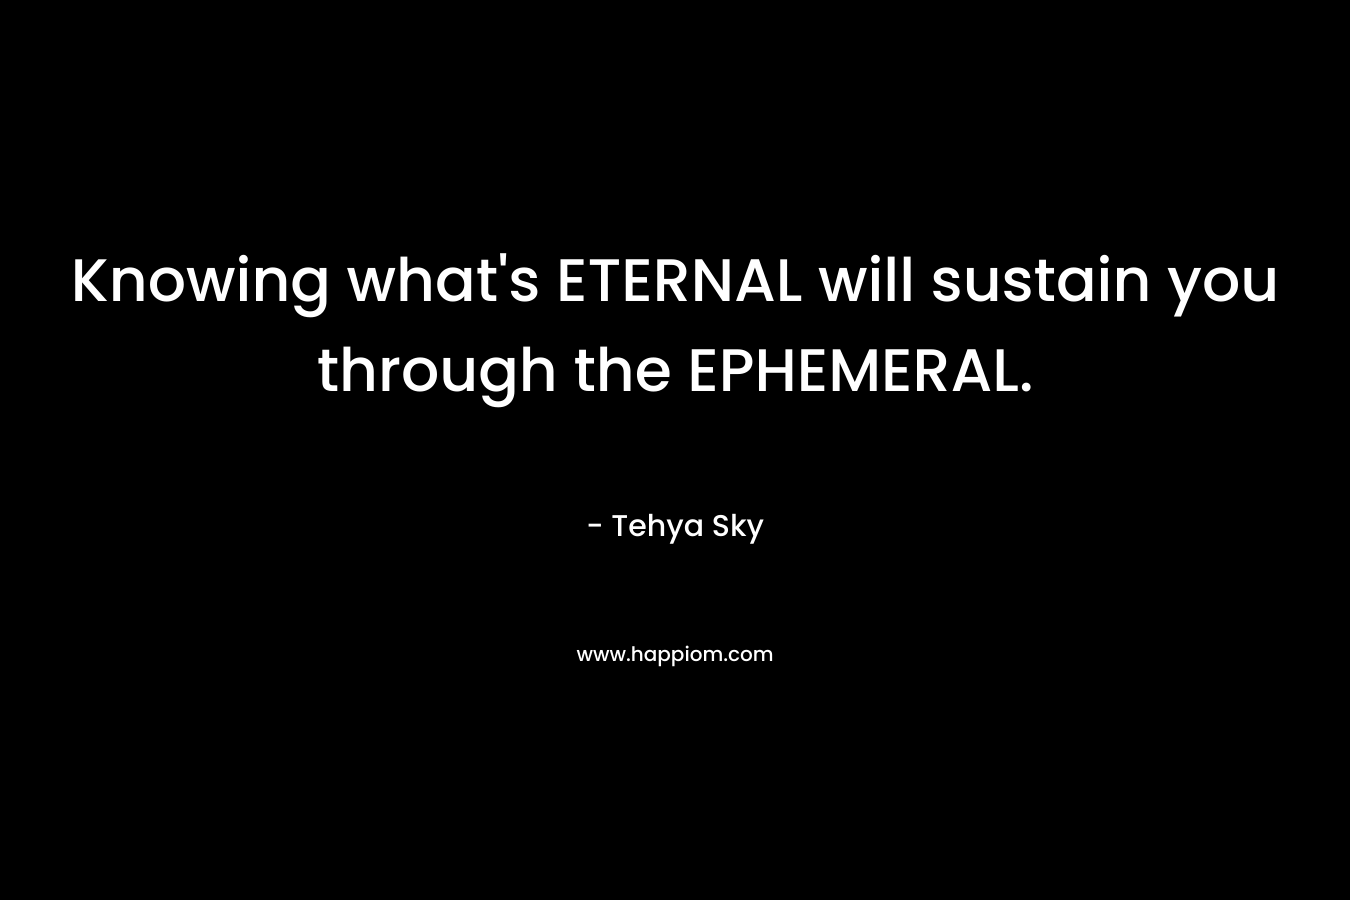 Knowing what’s ETERNAL will sustain you through the EPHEMERAL. – Tehya Sky